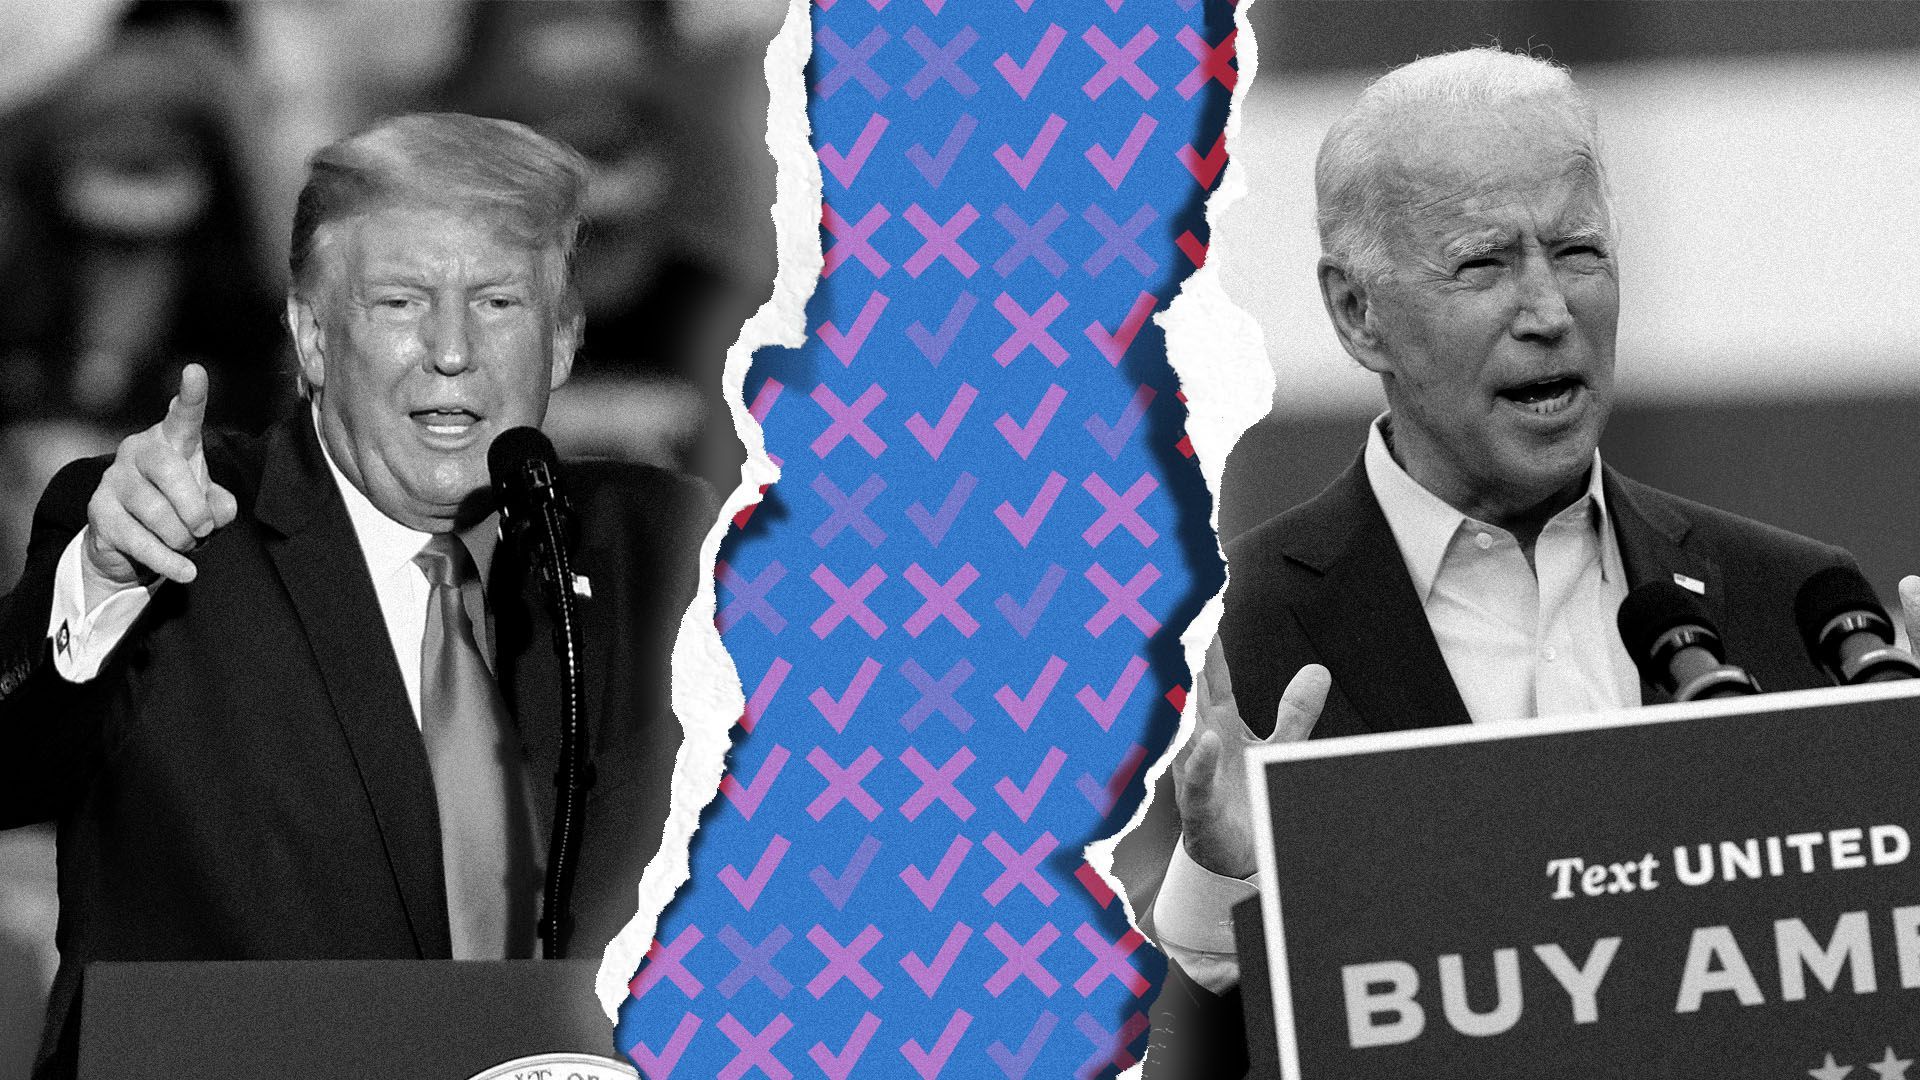 Photo illustration of torn photos of Donald Trump and Joe Biden revealing check marks and x's beneath